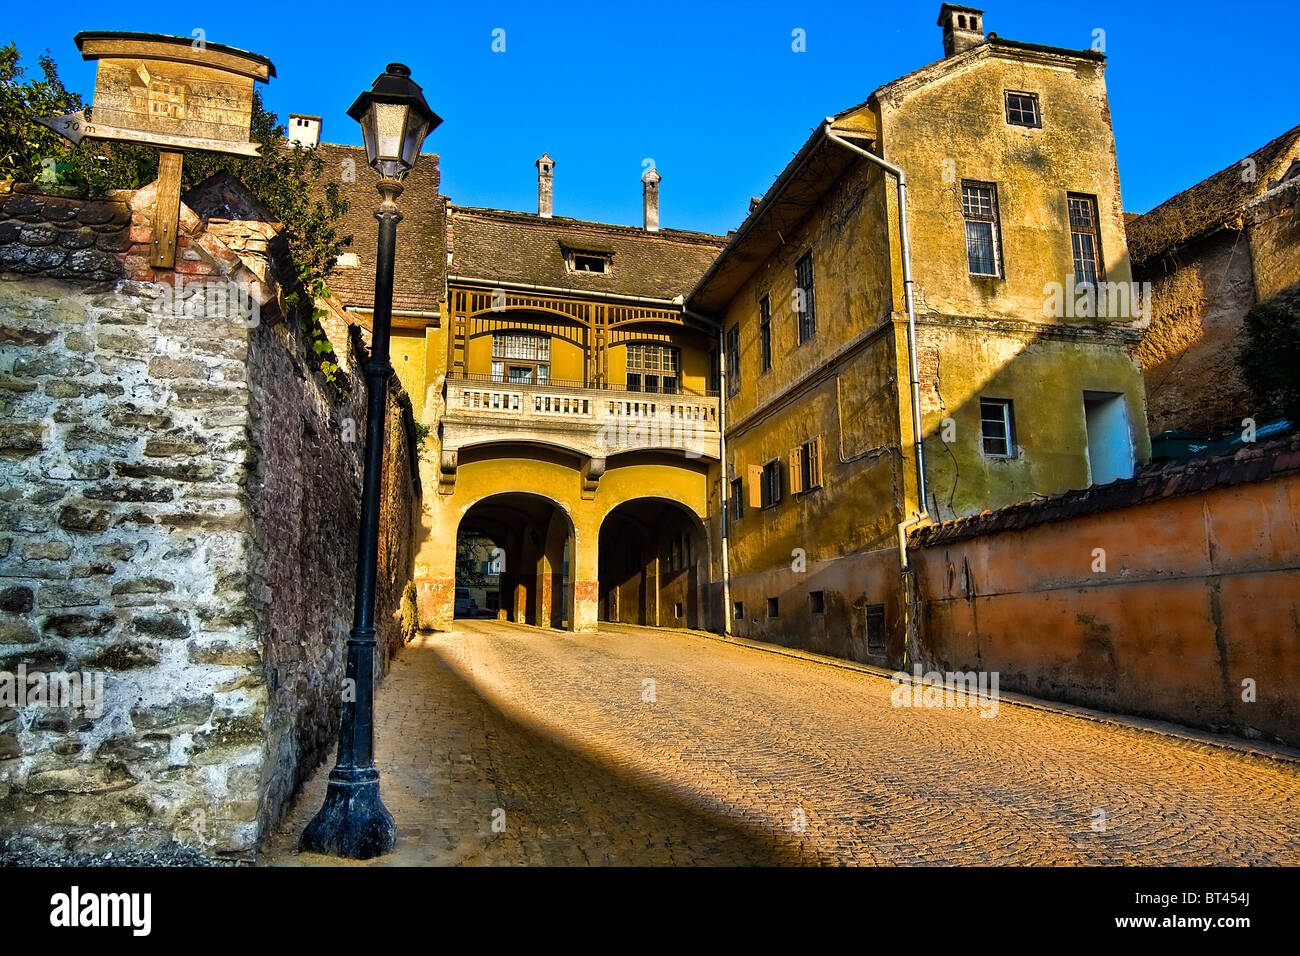 Old Balcony house in the medieval citadel of Sighisoara, Romania. Stock Photo